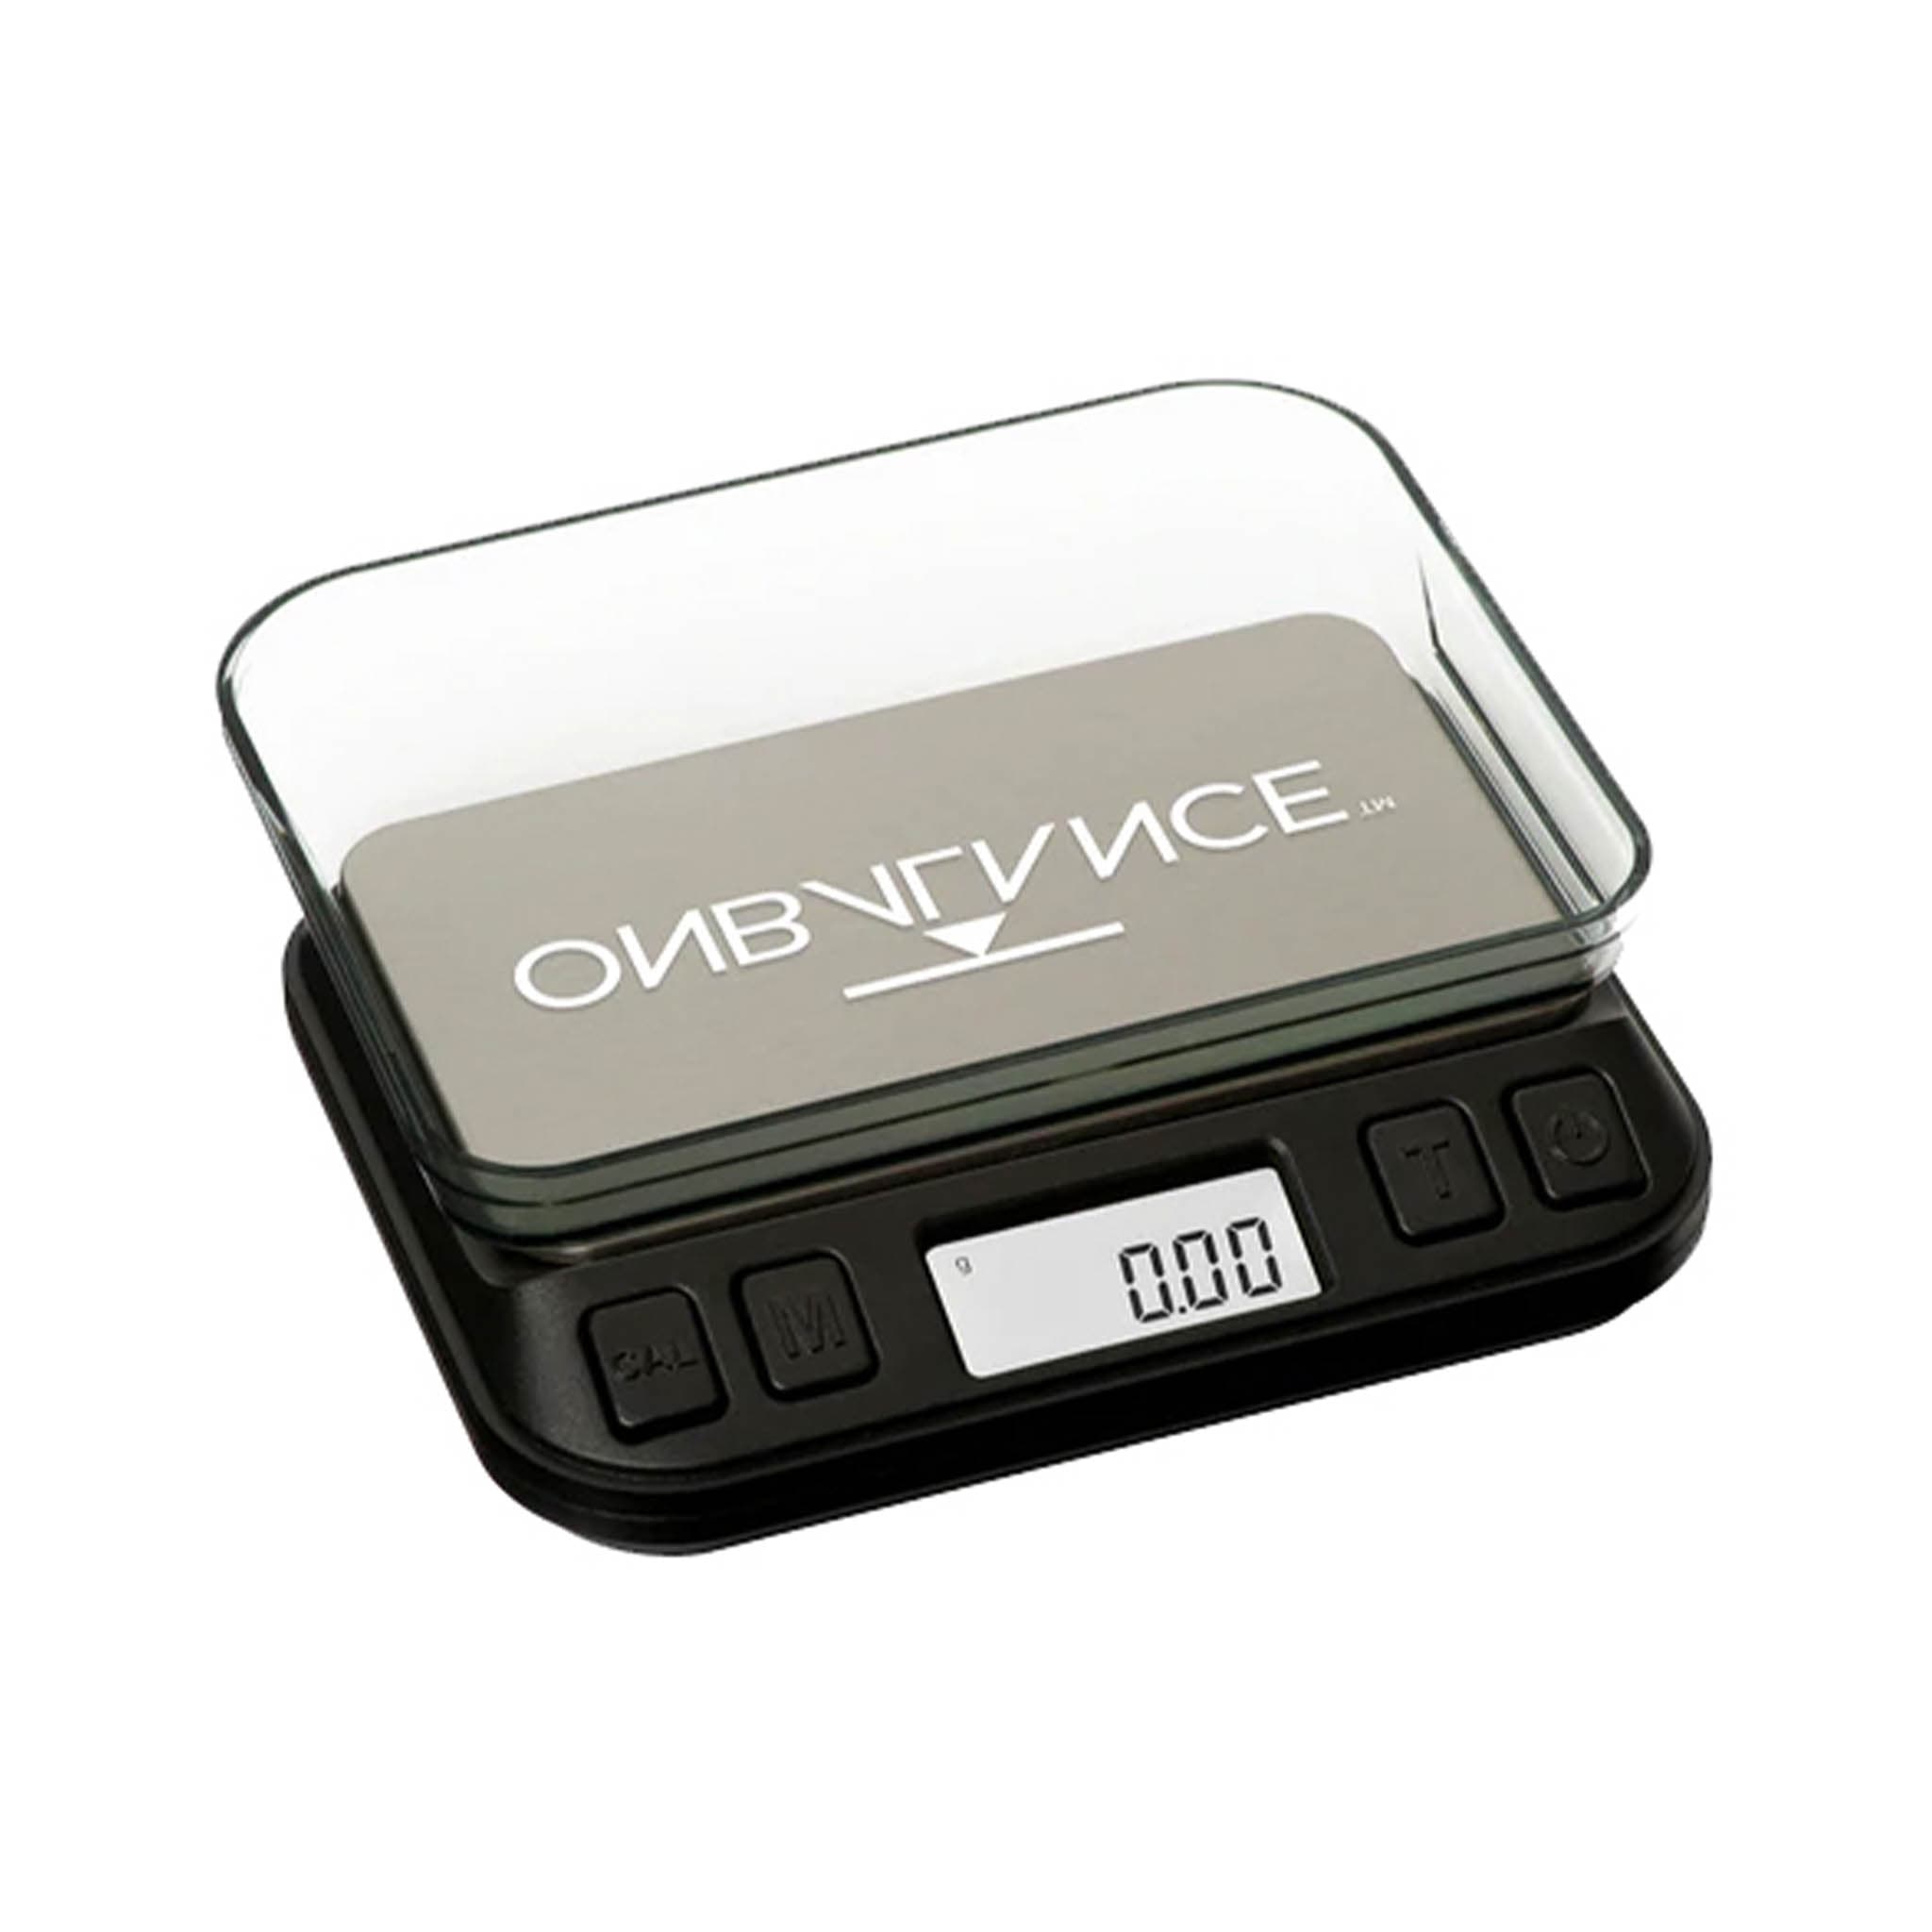 Small High Accuracy Weighing Scales to 0.01g